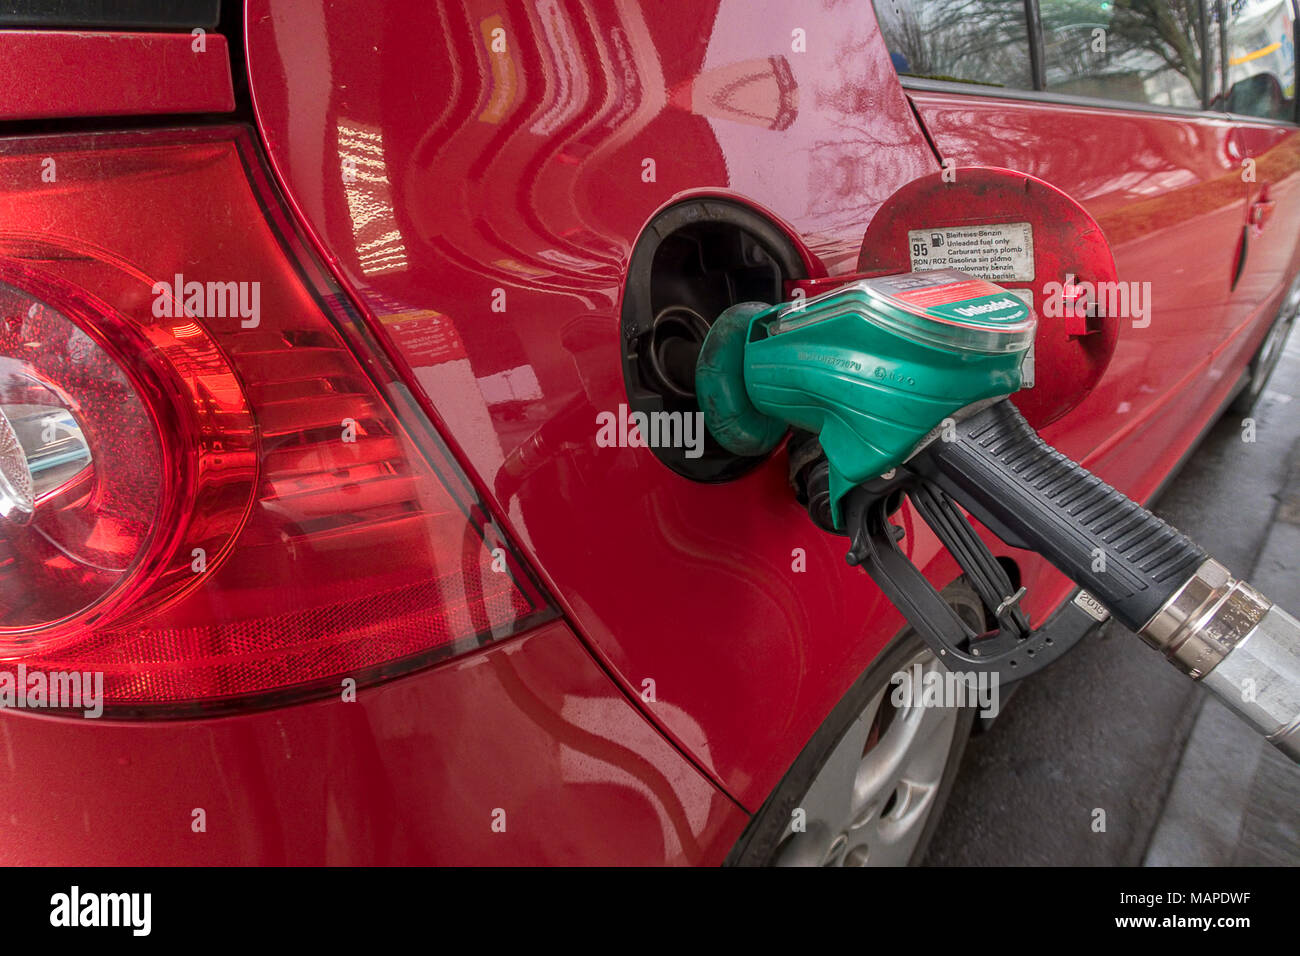 Close up image of a car being filled with fuel at a petrol station, London, England Stock Photo